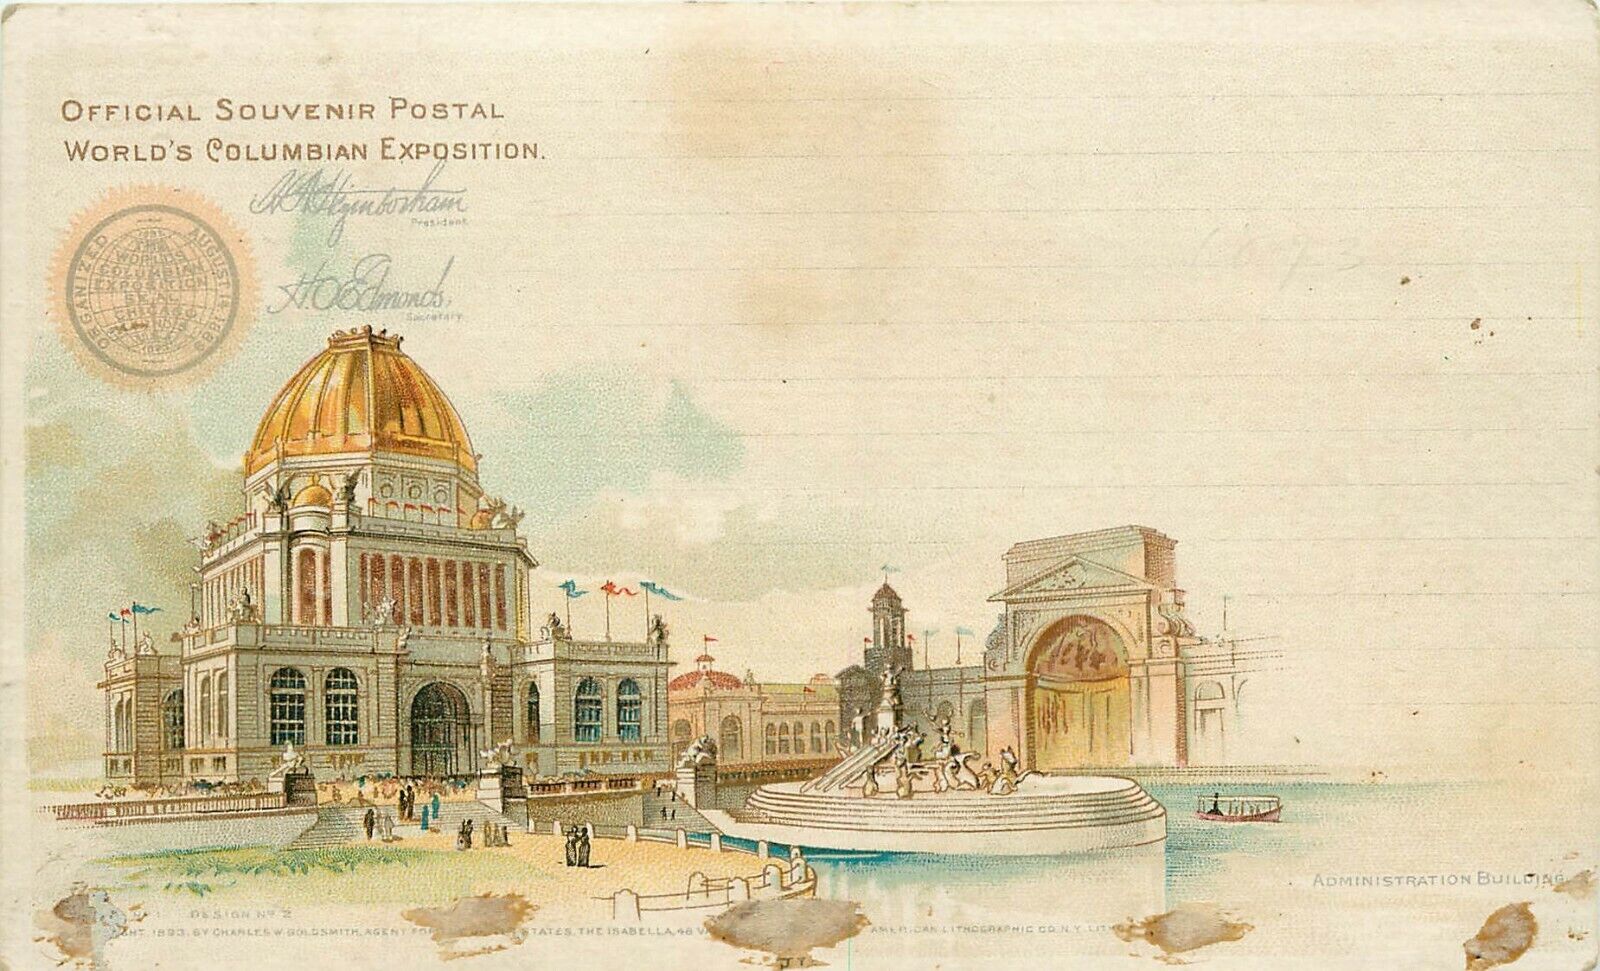 VIEW ADMINISTRATION BUILDING POSTAL CARD 1893 WORLDS COLUMBIAN EXPOSITION FAIR